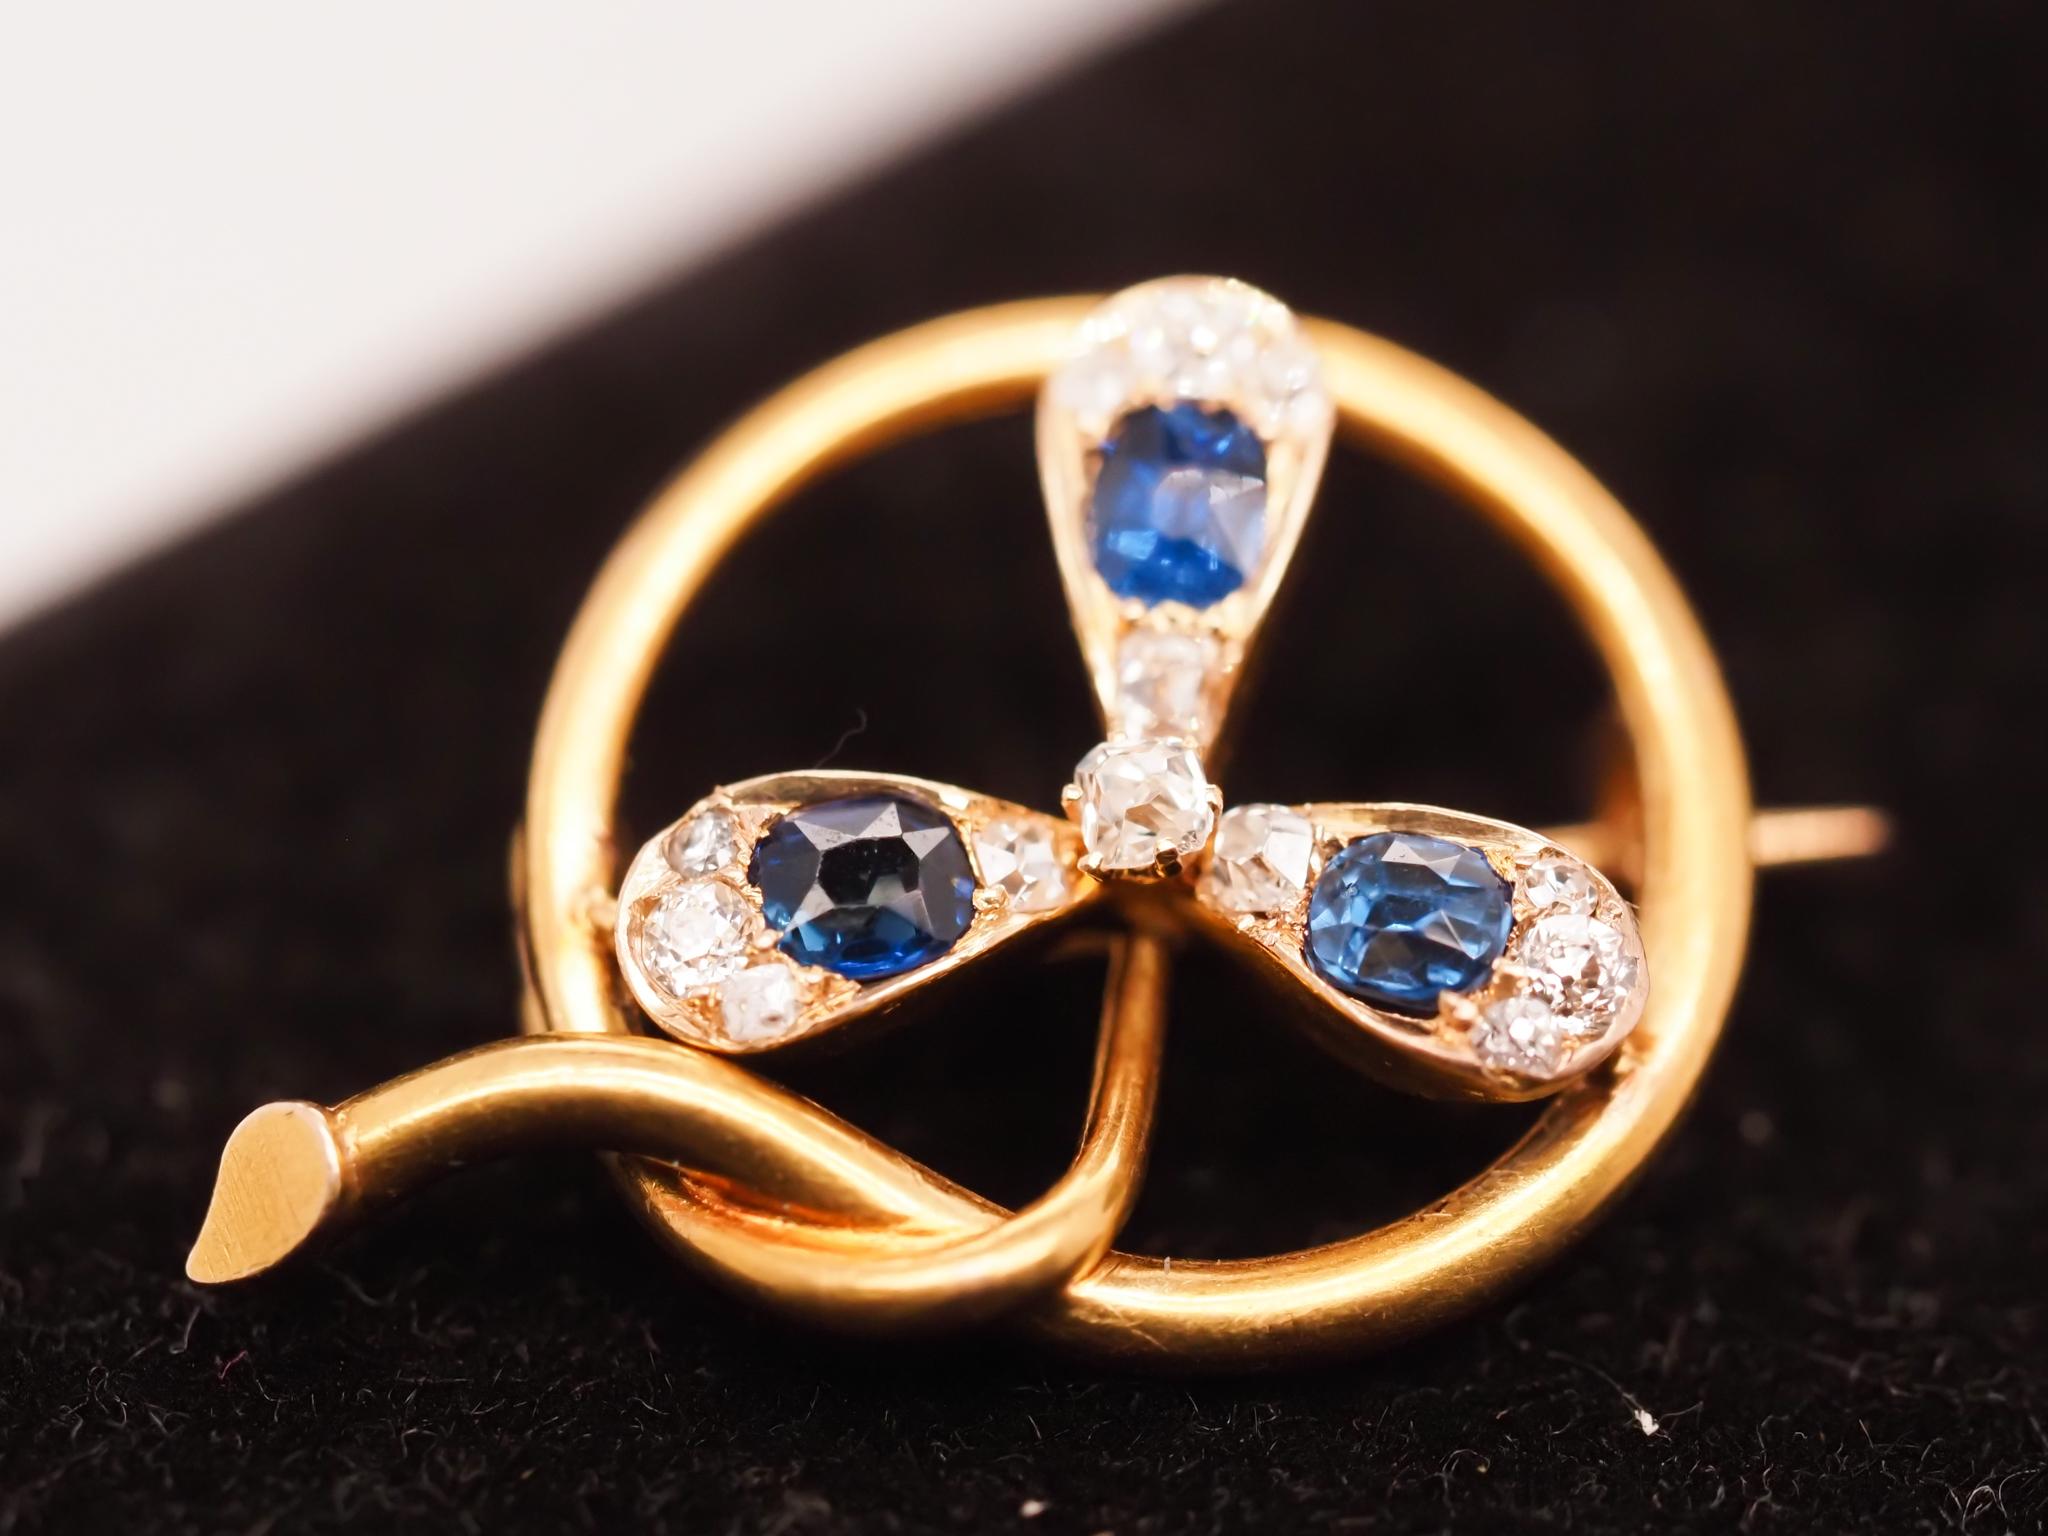 Circa 1900s 14K Yellow Gold Sapphire and Diamond Flower Brooch For Sale 3